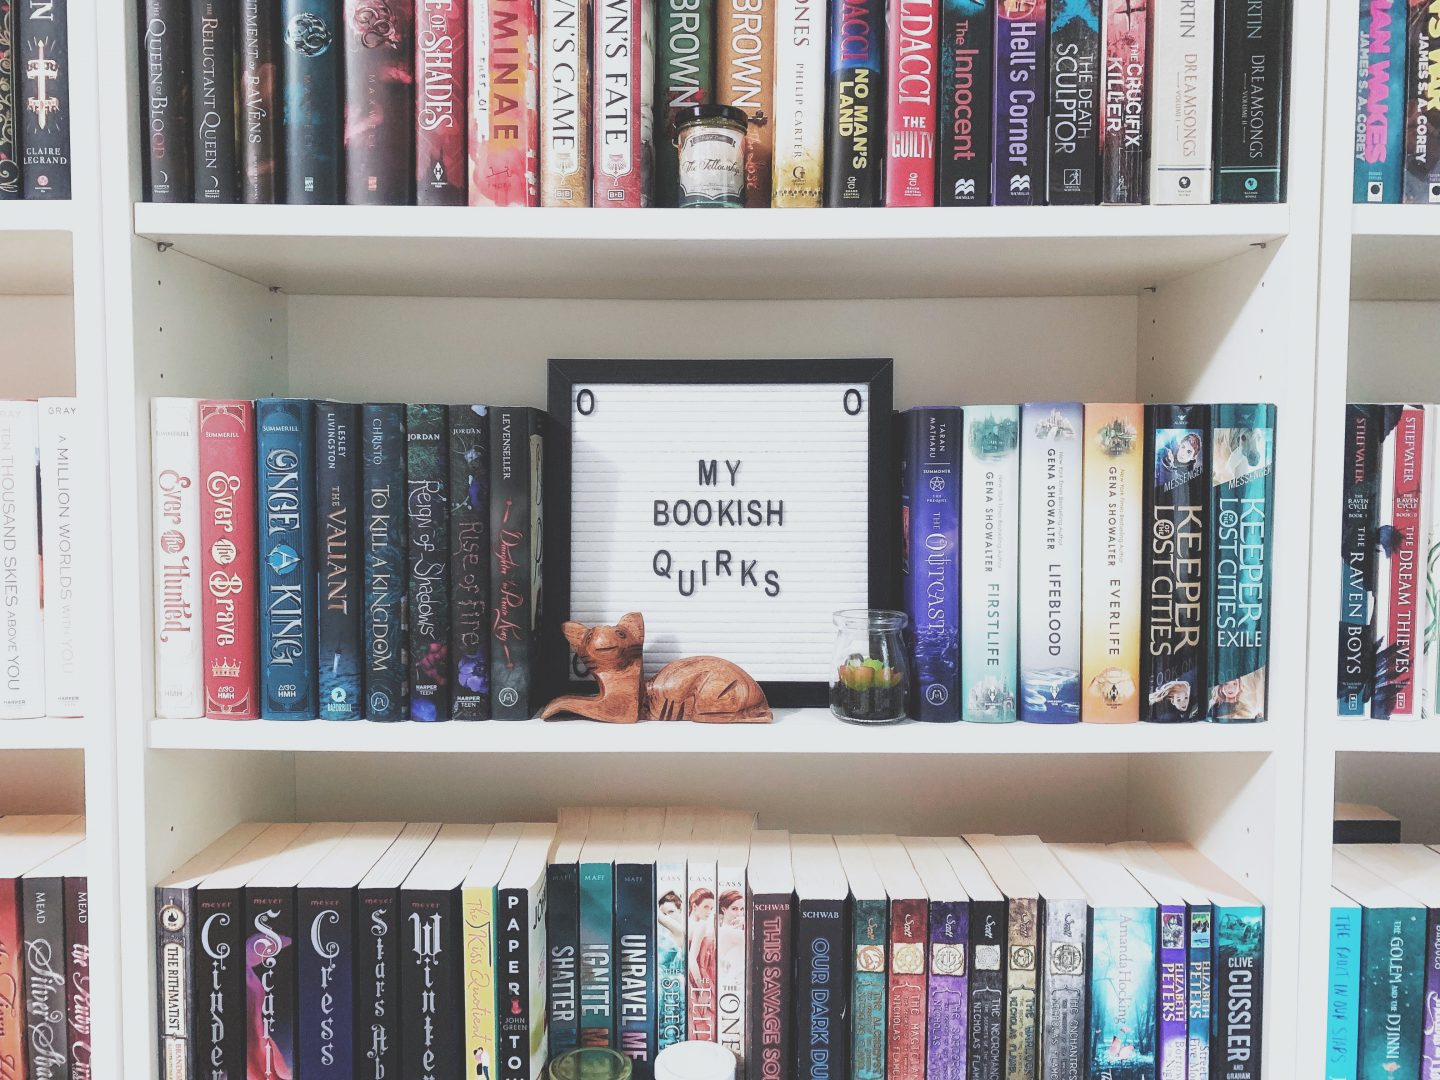 My bookish quirks